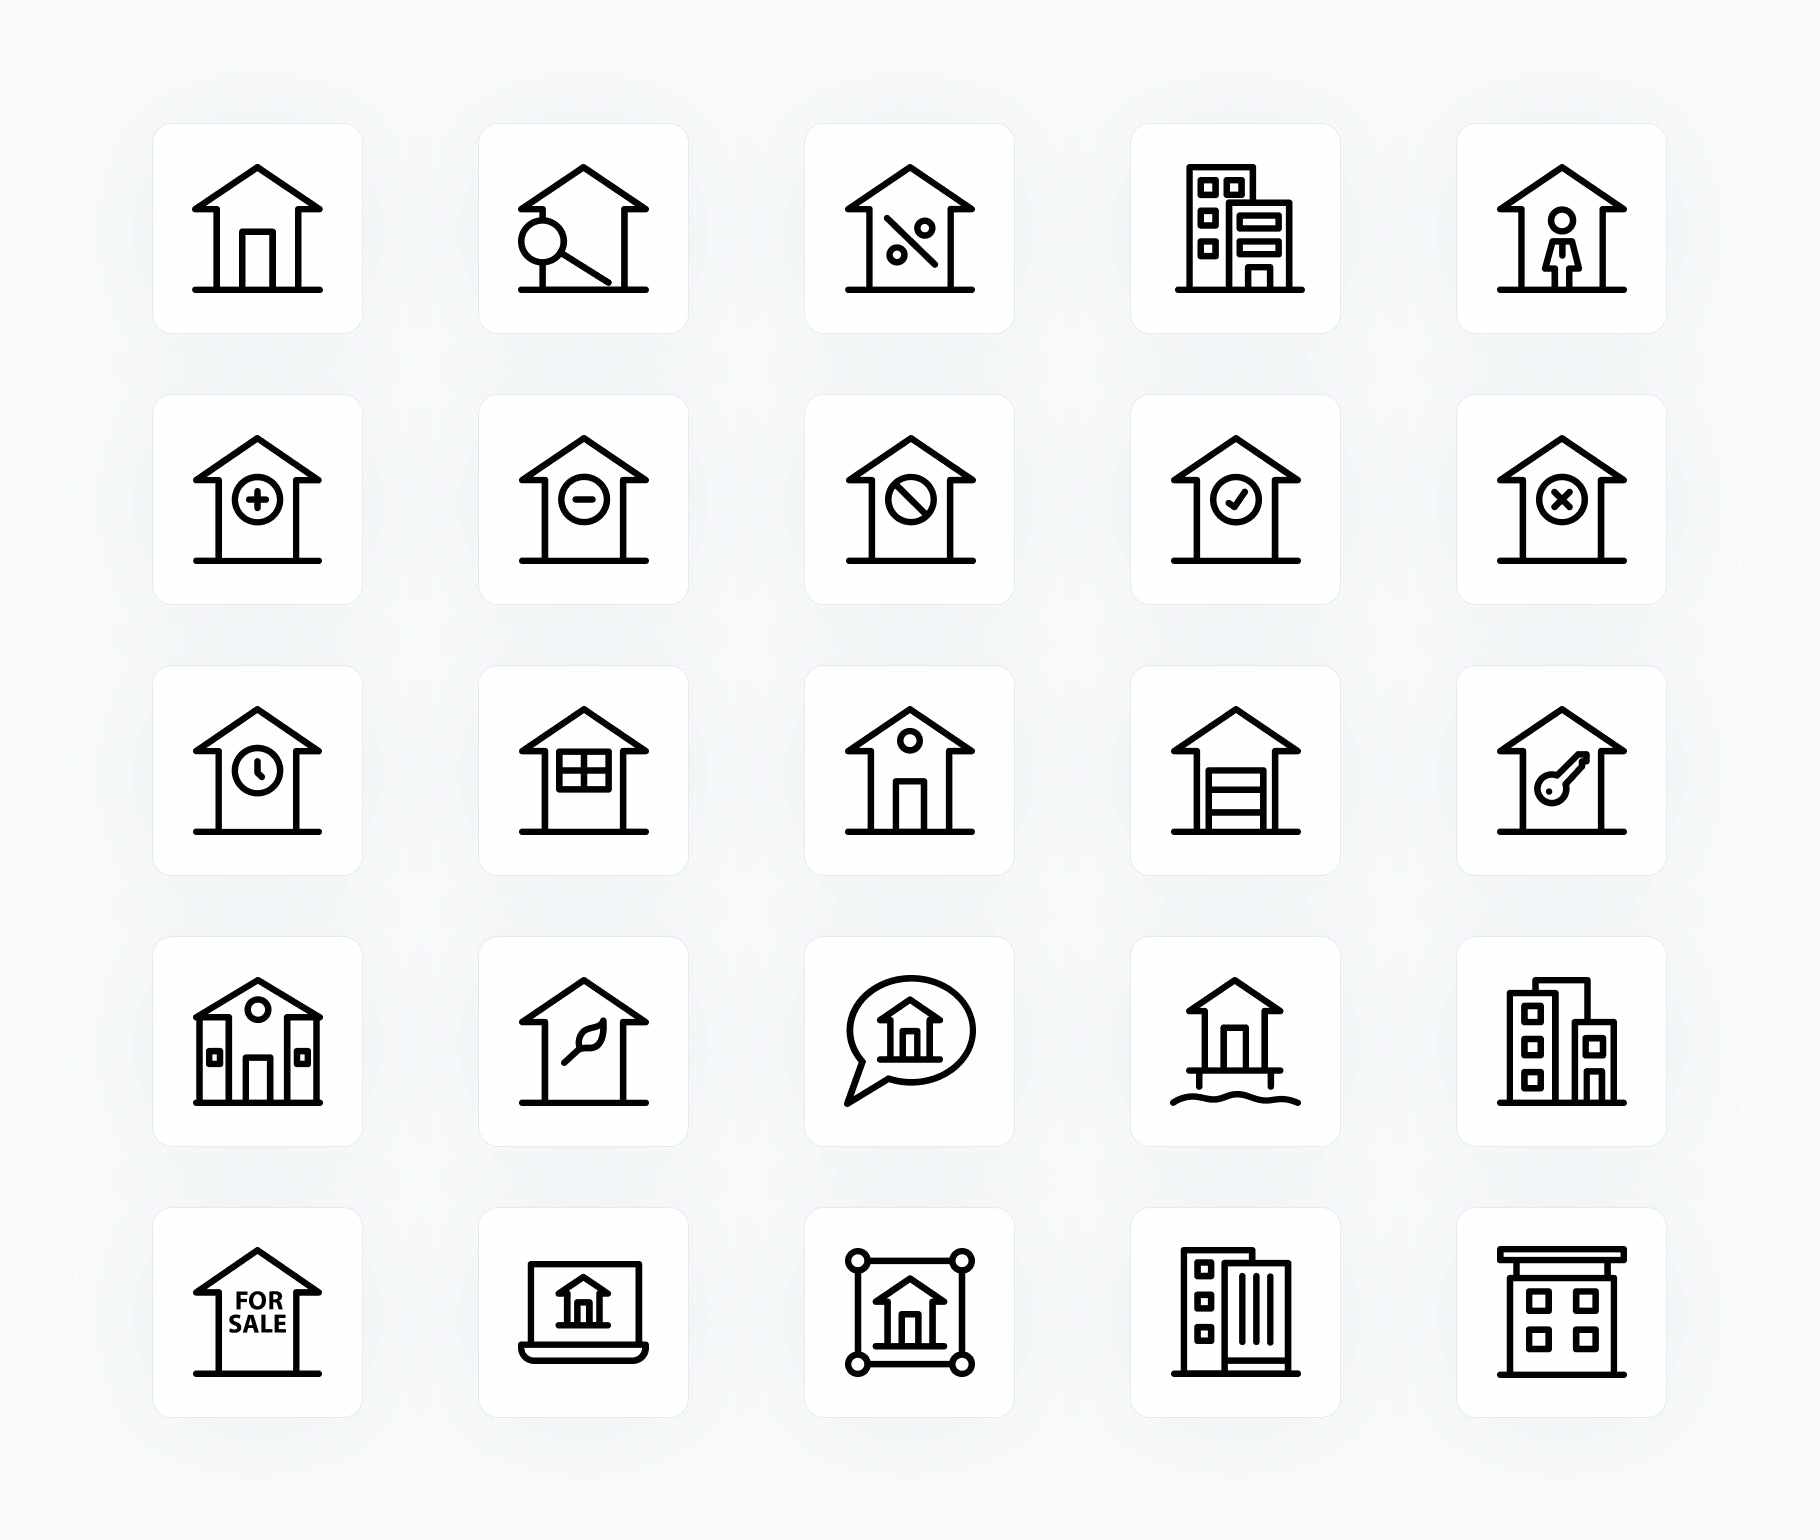 Building Houses and Real Estate-Outline-Vector-Icons Icons Building Houses and Real Estate Outline Vector Icons S12172101 powerpoint-template keynote-template google-slides-template infographic-template